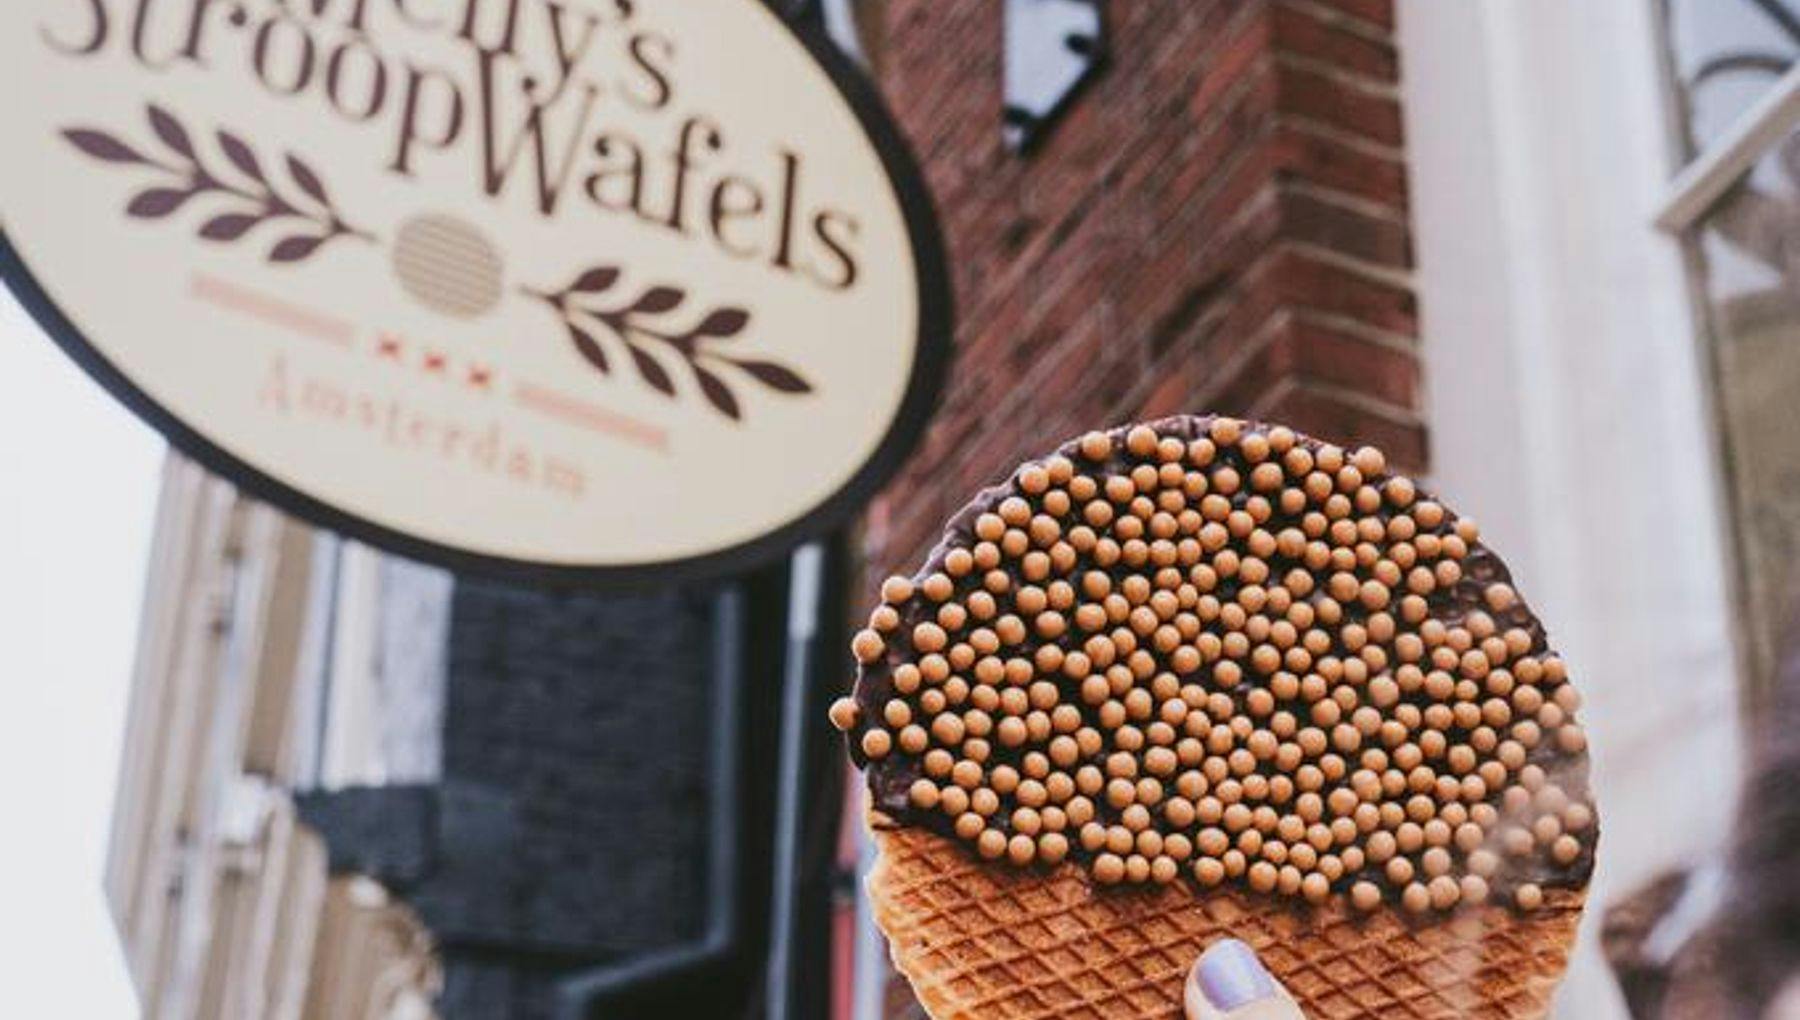 Chocolate covered stroopwafel from Melly's Stroopwafels